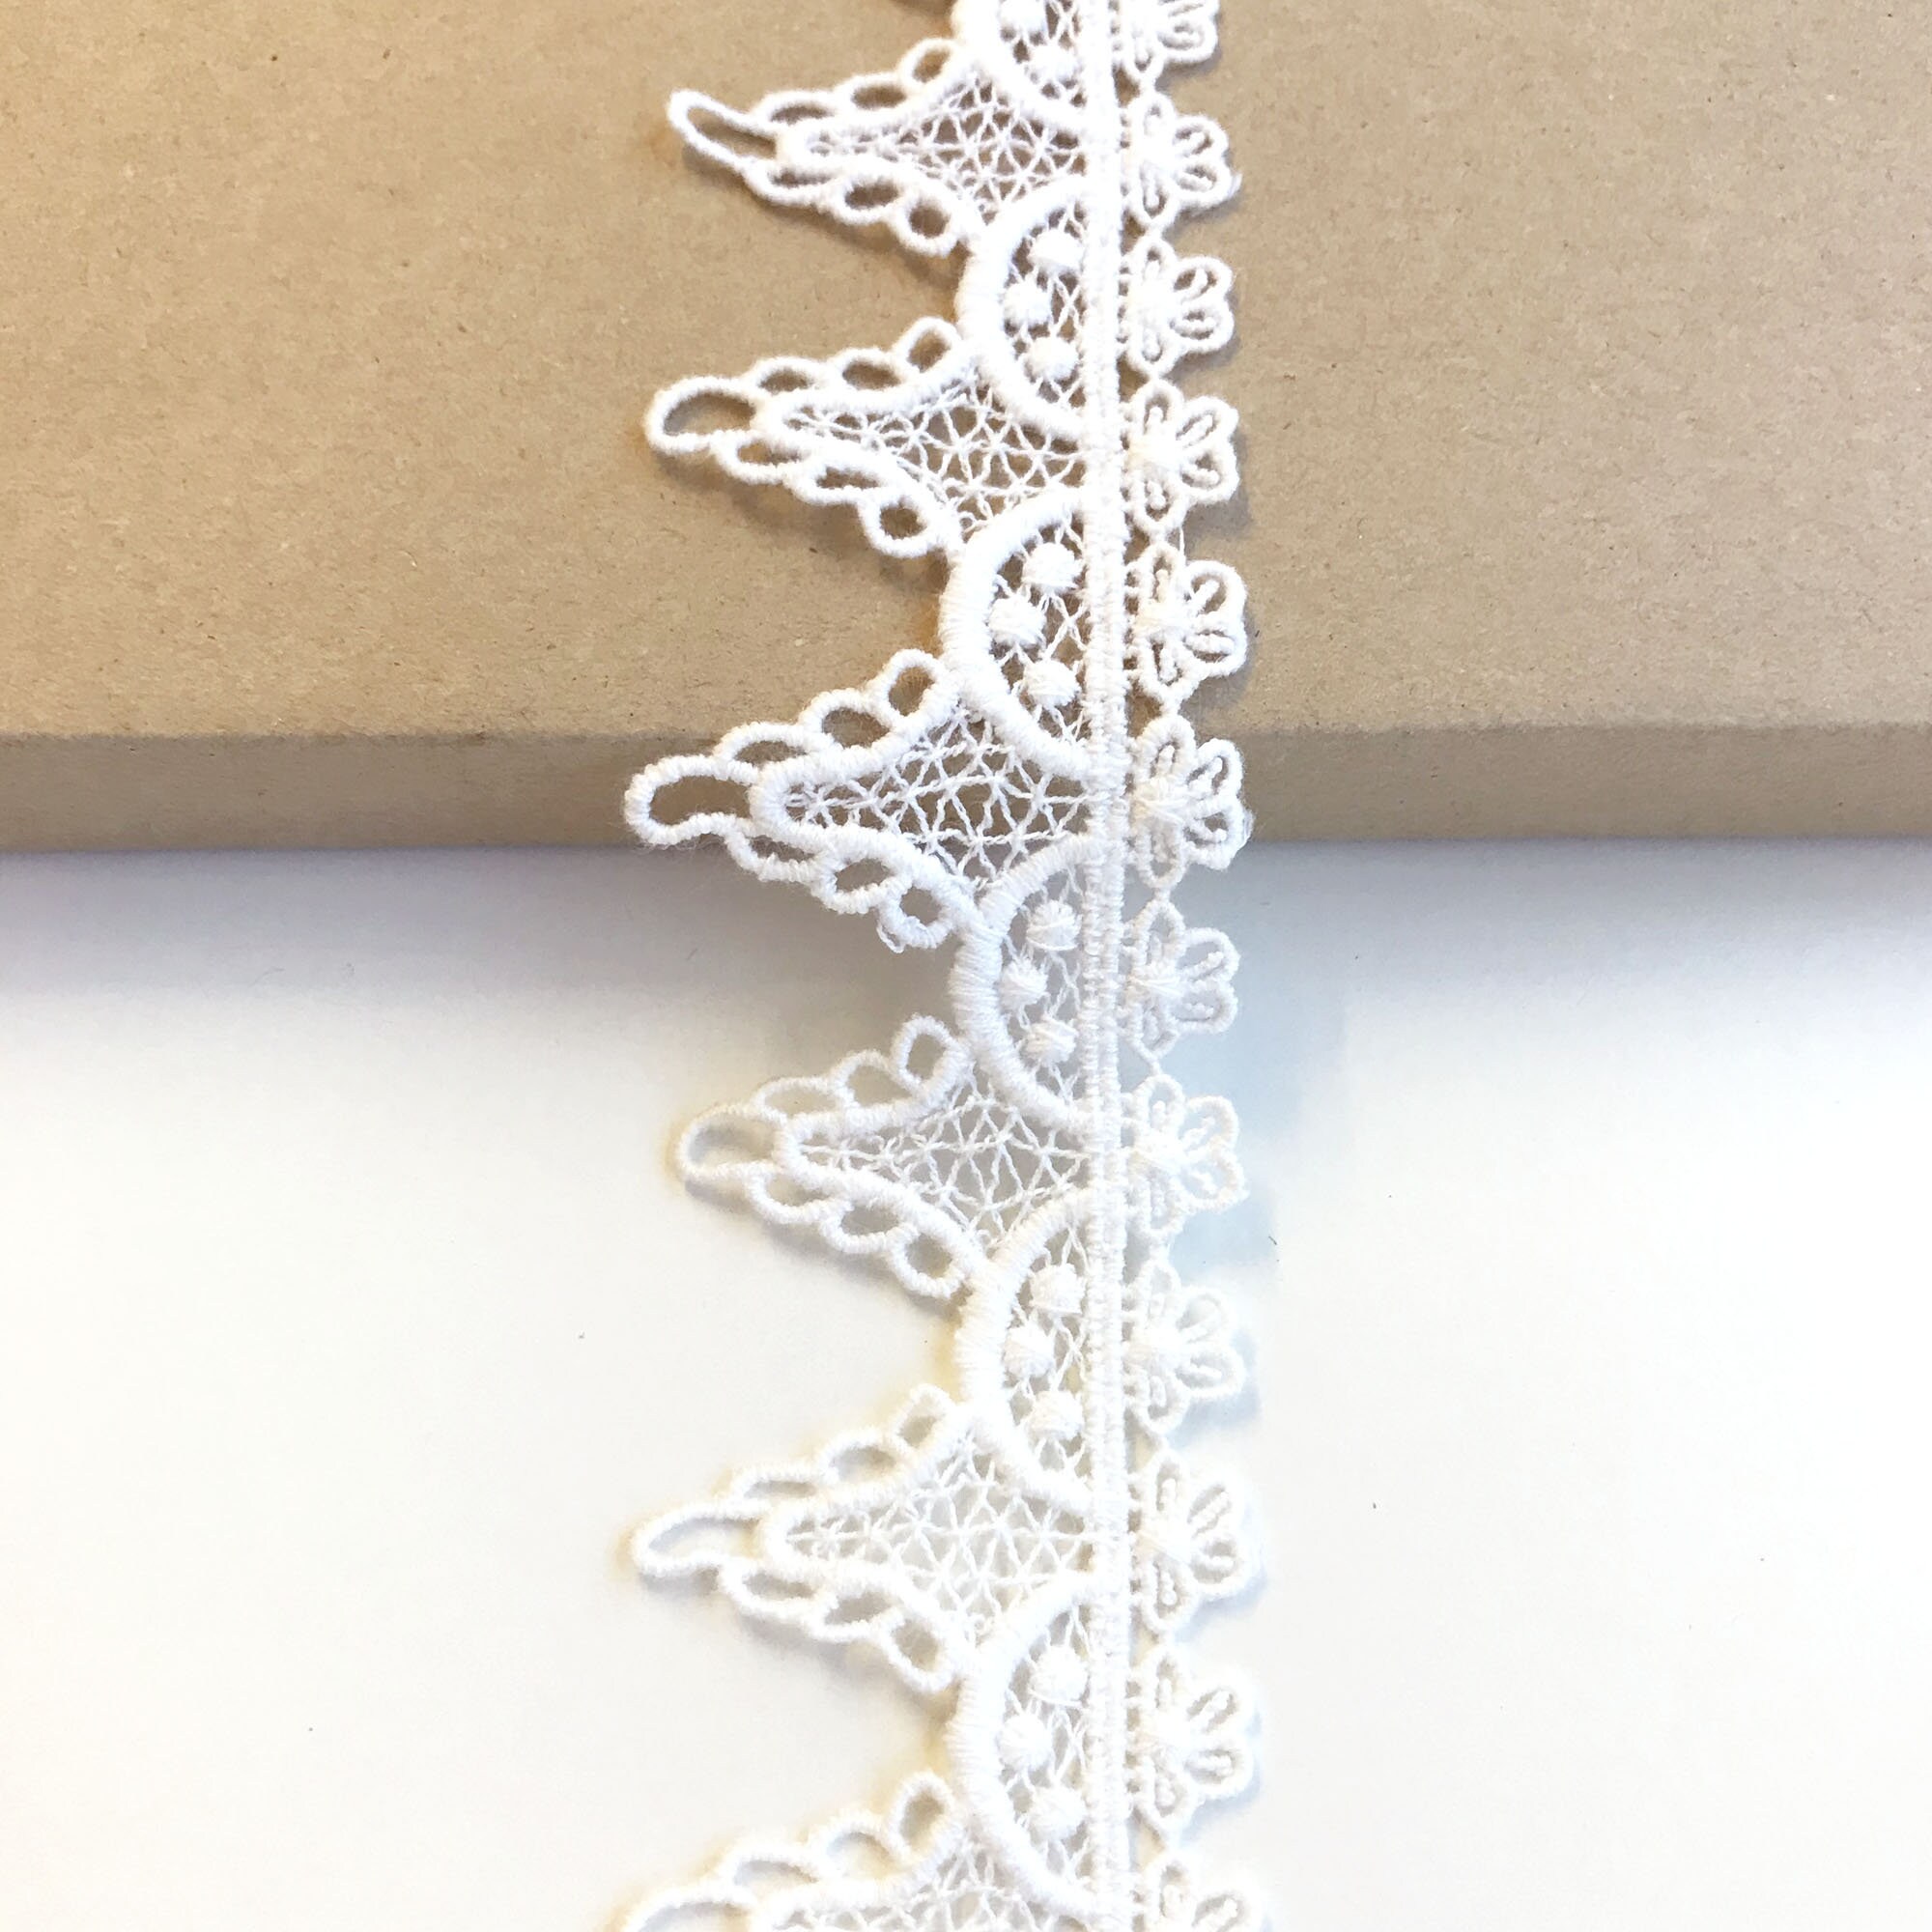 Natural, off White 2 Various Width and Shape Cotton Lace Trimlt4 